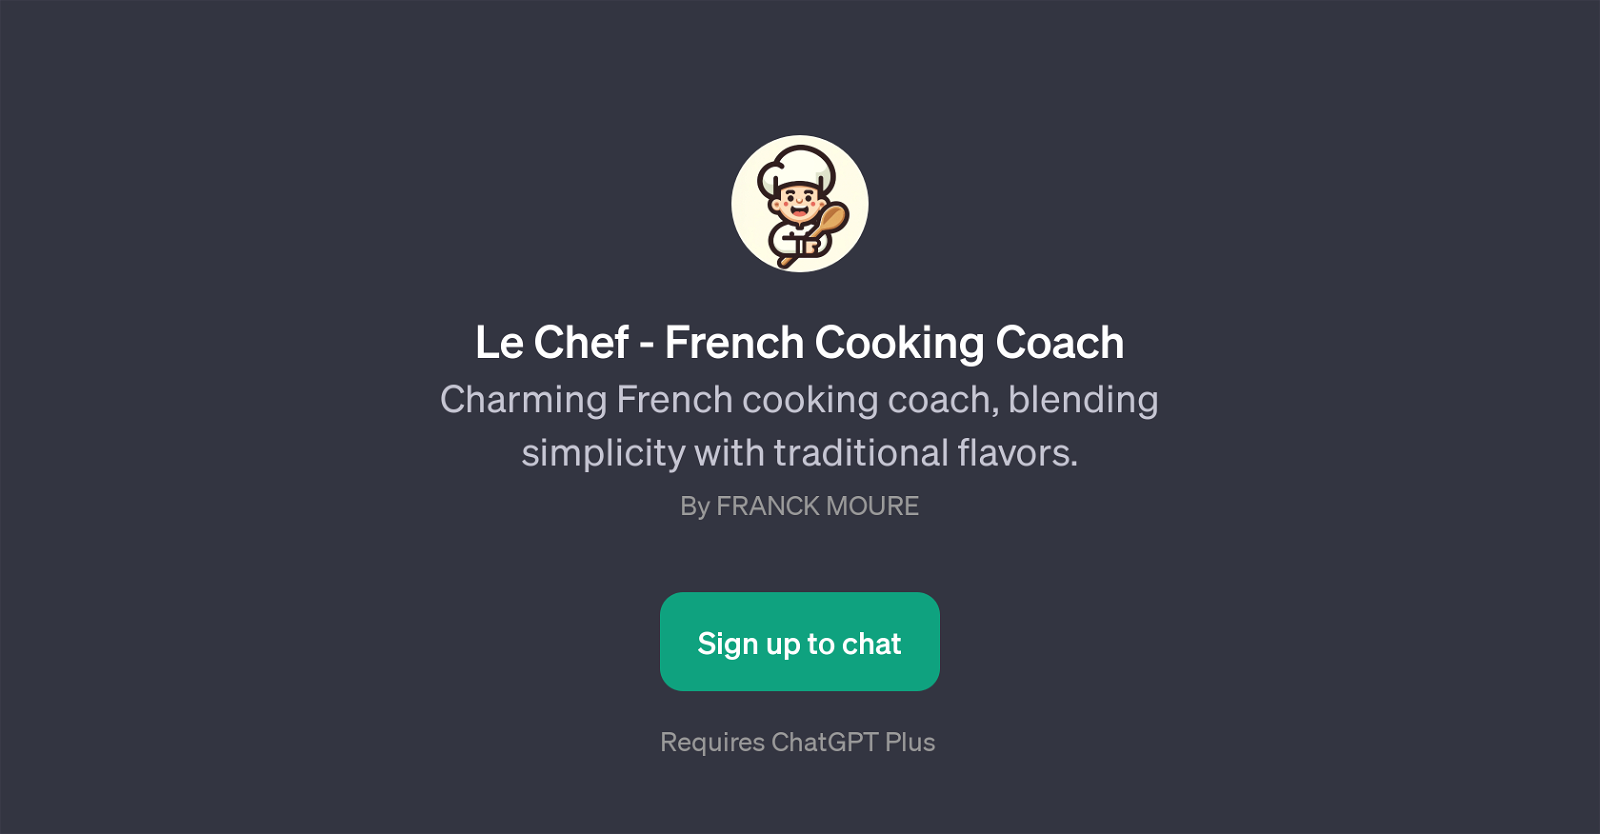 Le Chef - French Cooking Coach website